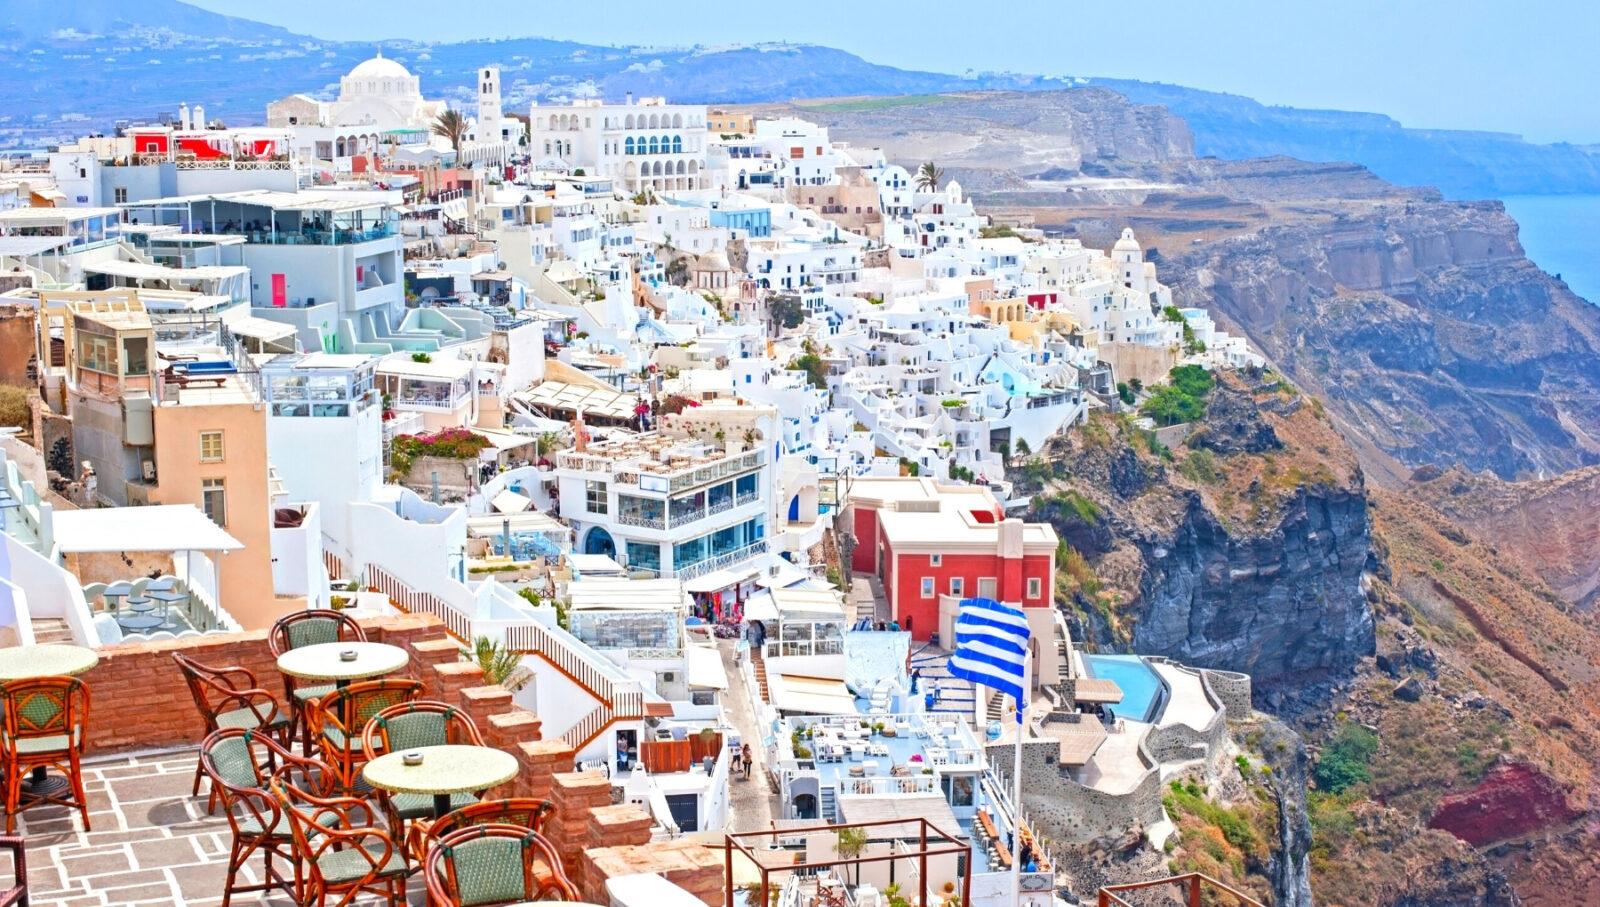 9.000 m² PLOT WITH A 4.400 m² BUILDING PERMIT FOR SALE IN SANTORINI, GREECE